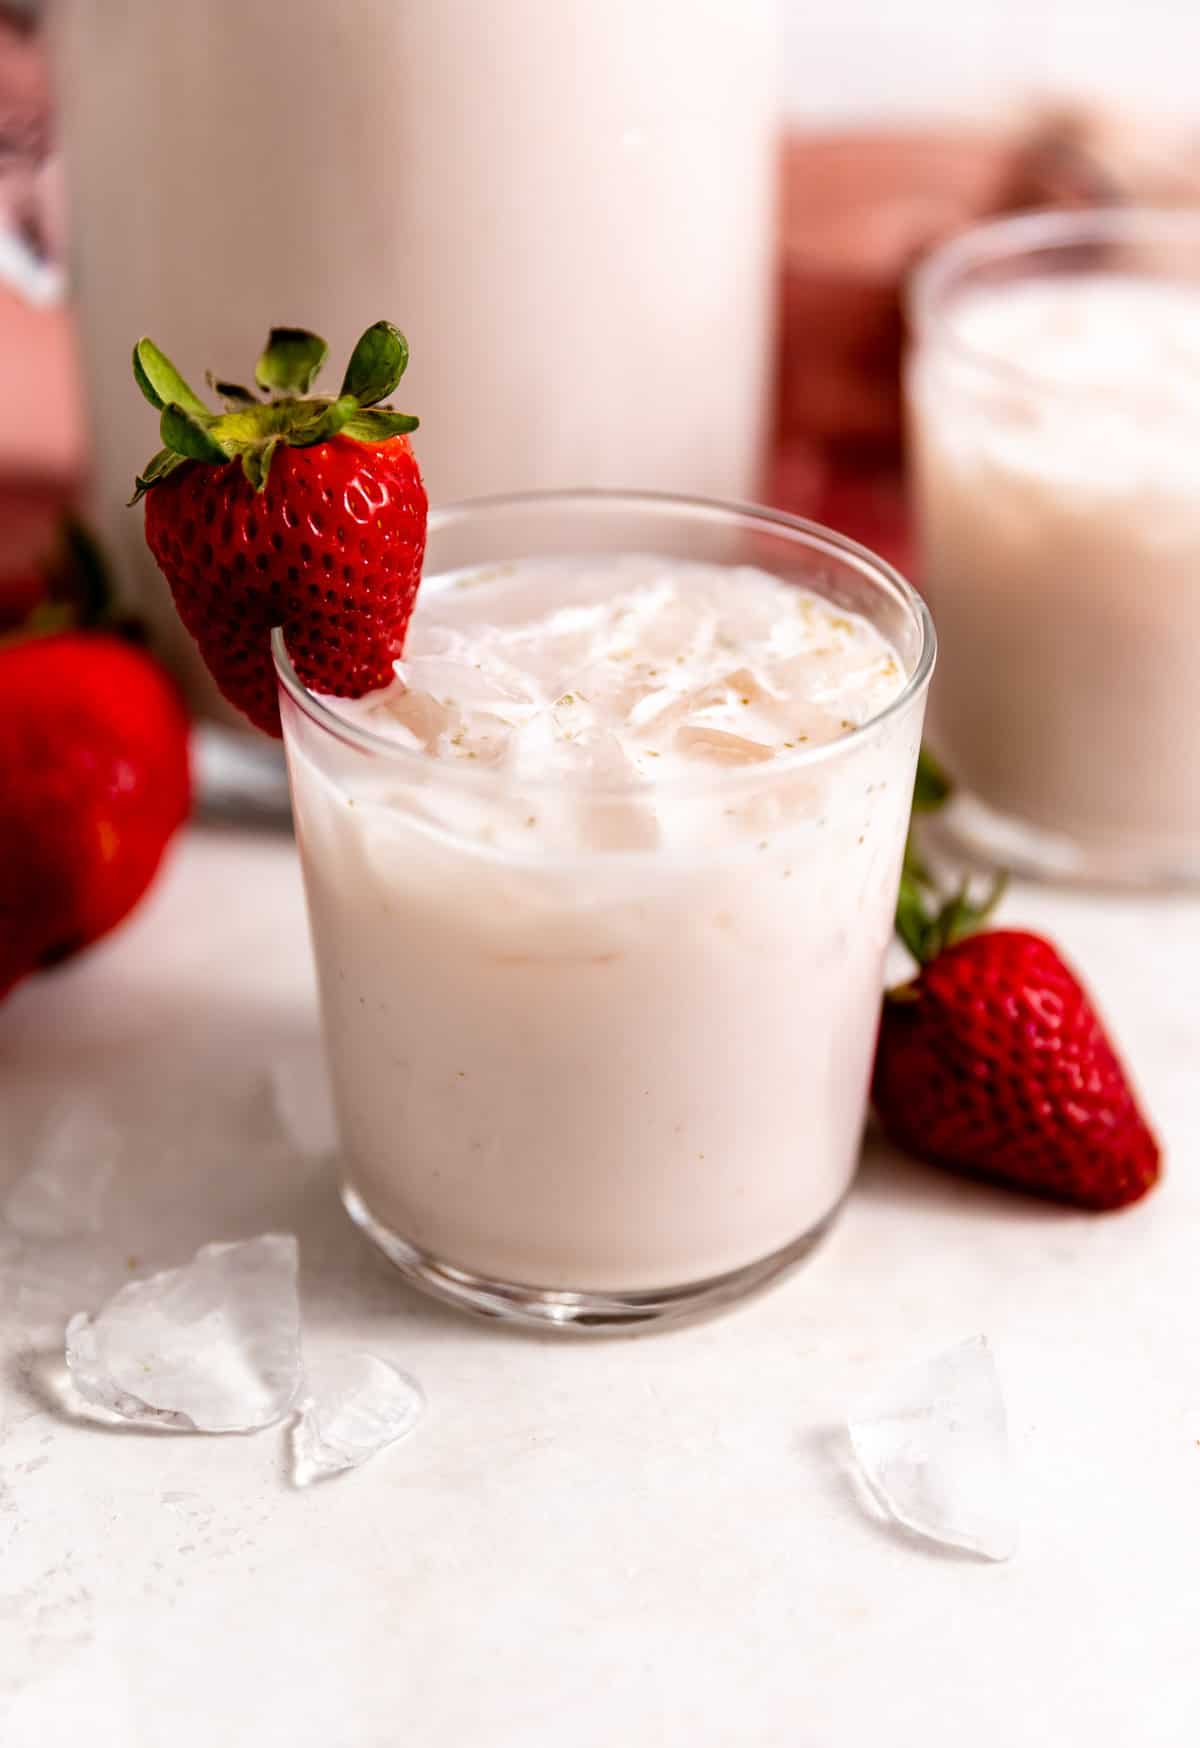 Small glass filled with light pink, strawberry horchata, with a strawberry on the rim of the glass as a garnish.